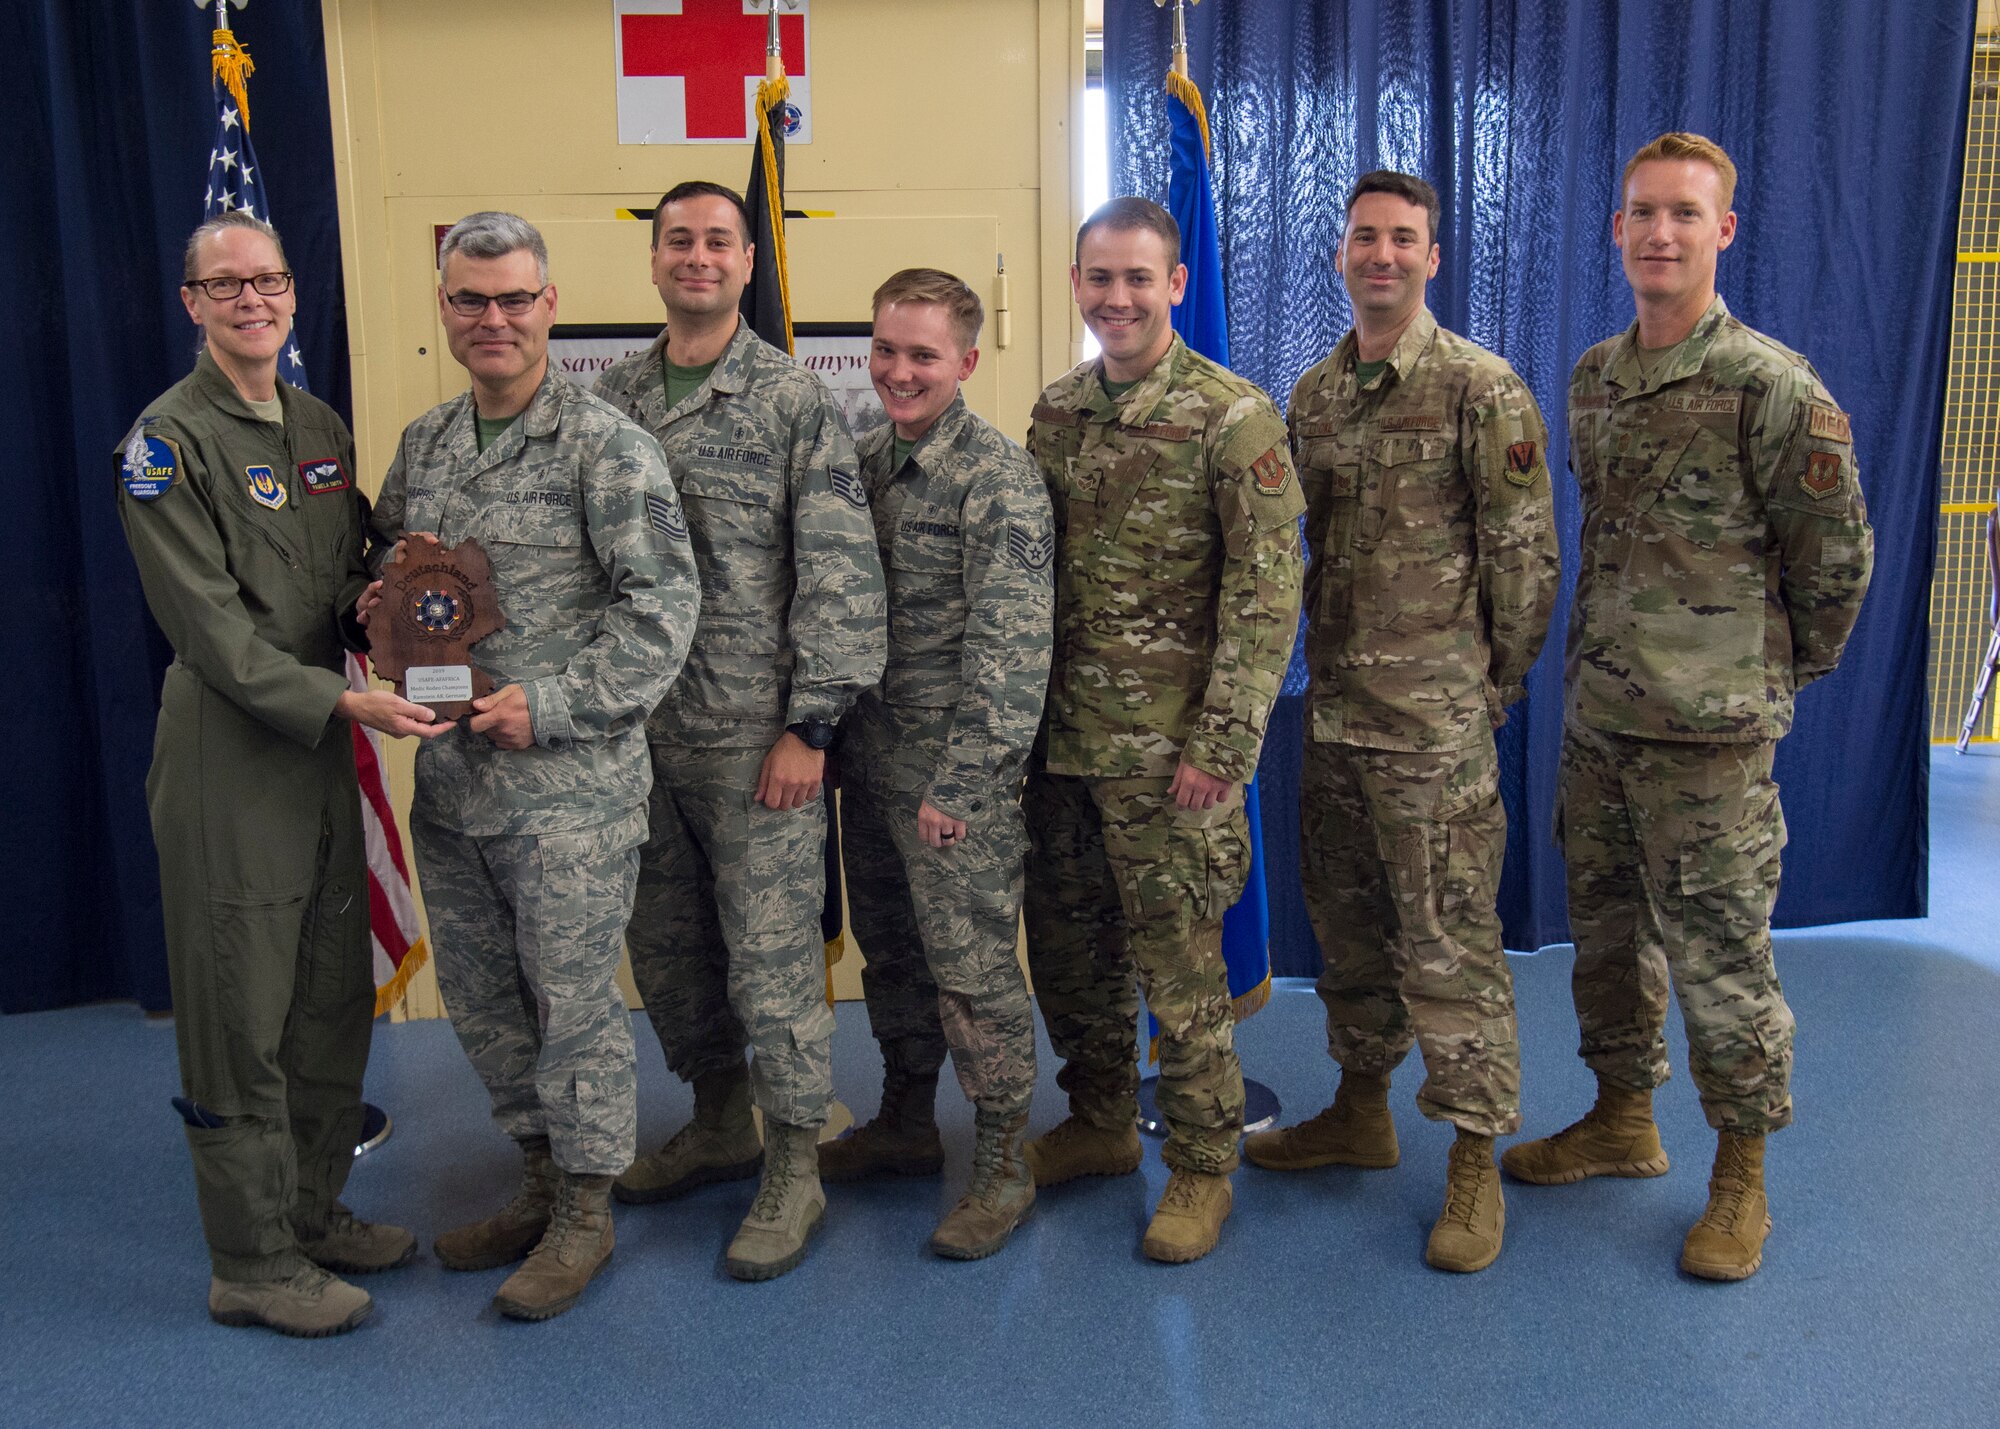 Members of the 48th Medical Group from Royal Air Base Lakenheath, England receive the U.S. Air Forces in Europe EMT Rodeo trophy at Ramstein Air Base, Germany, July 25, 2019. Teams were judged on how accurate and quickly they provided medical attention. (U.S. Air Force photo by Staff Sgt. Kirby Turbak)